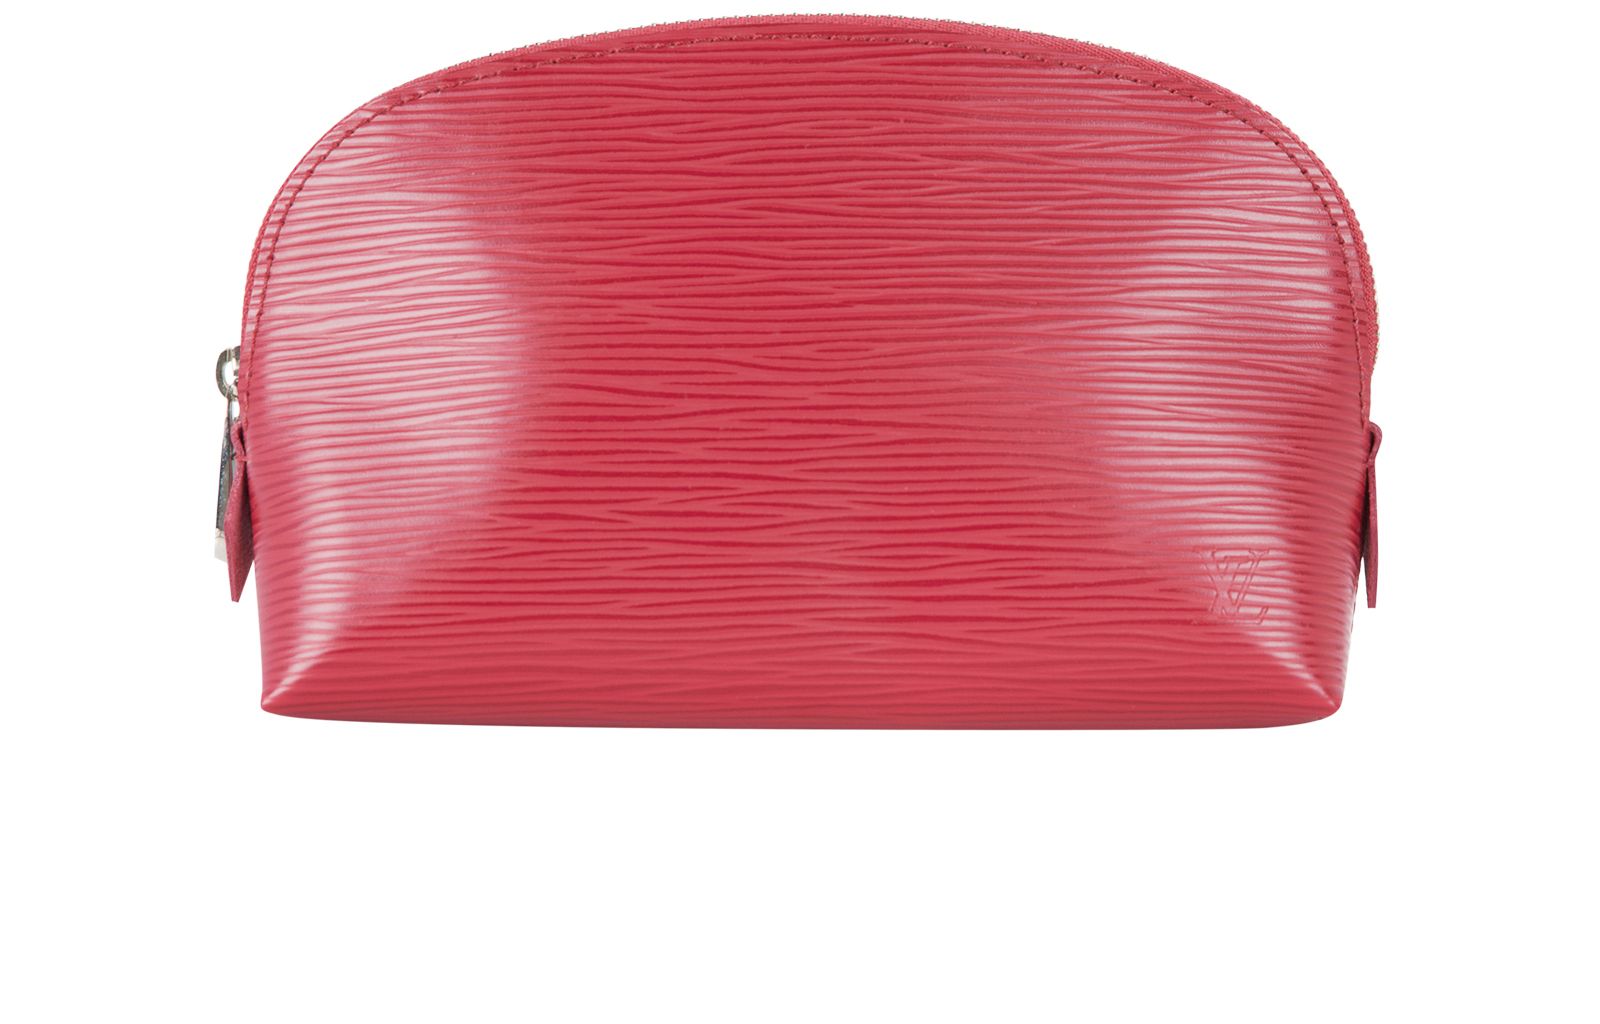 Louis Vuitton Epi Leather Cosmetic Pouch on SALE